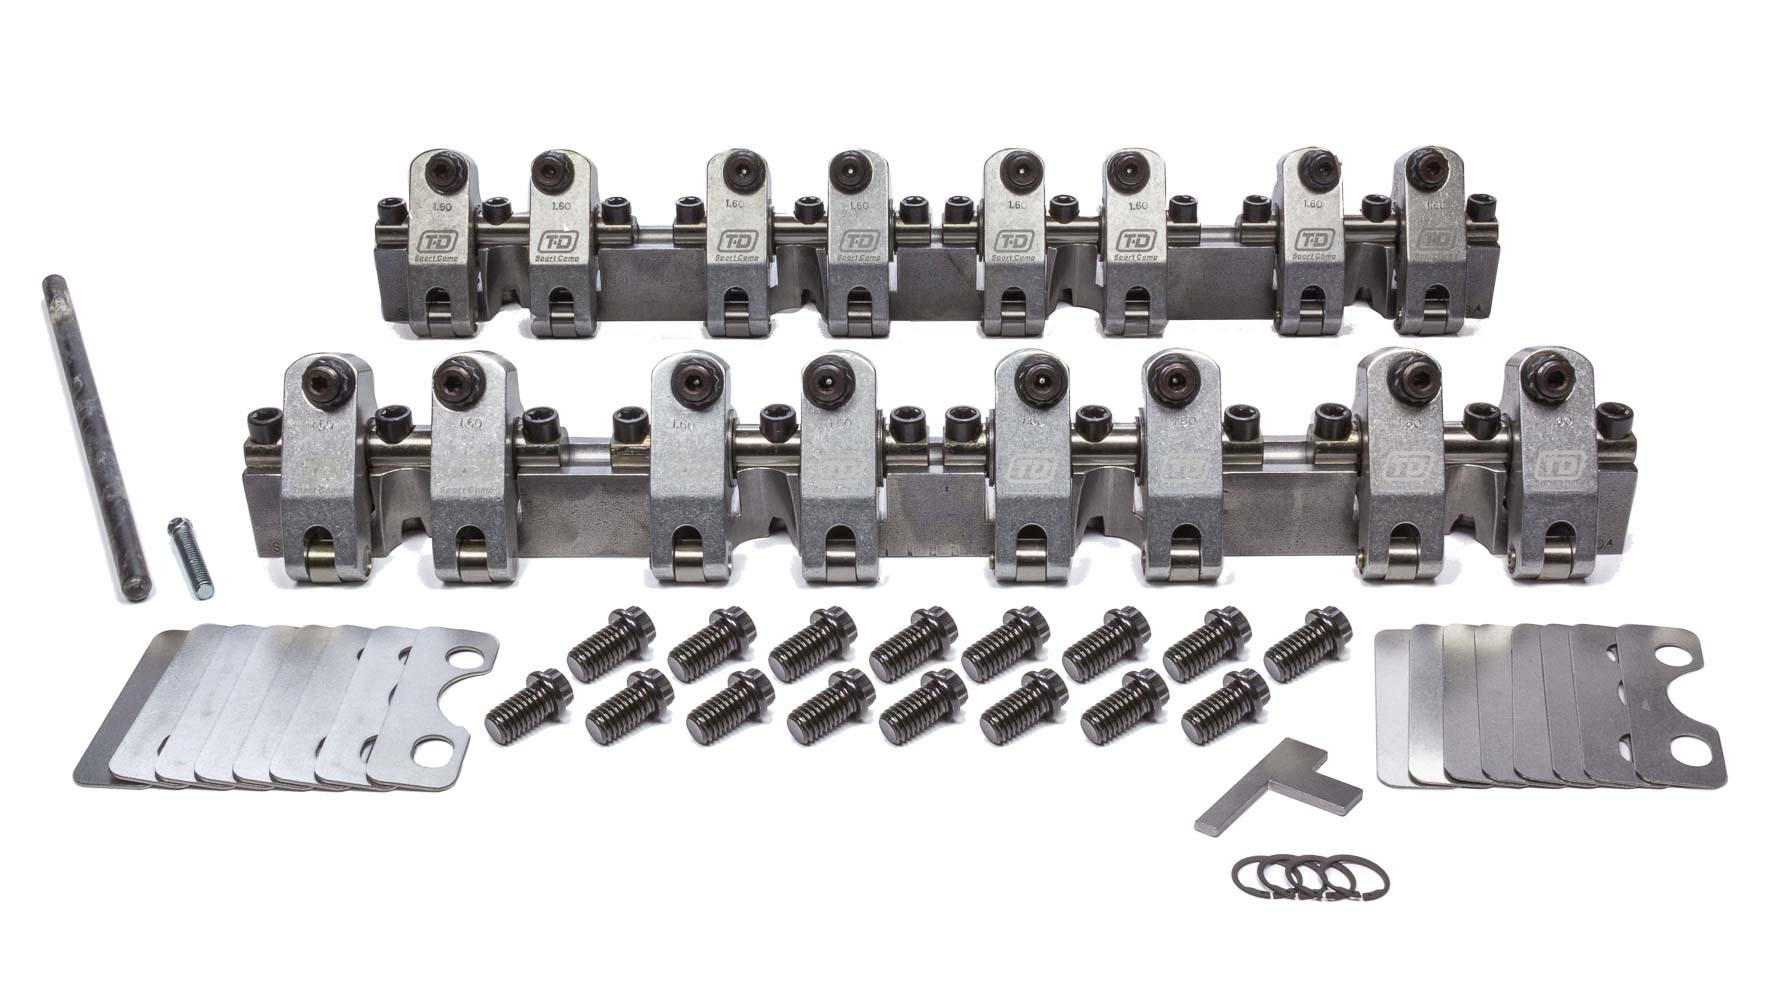 T&D 1.6/1.6 Ratio Rocker Arm Shaft Kit for Small Block Chevy 2144-160/160 